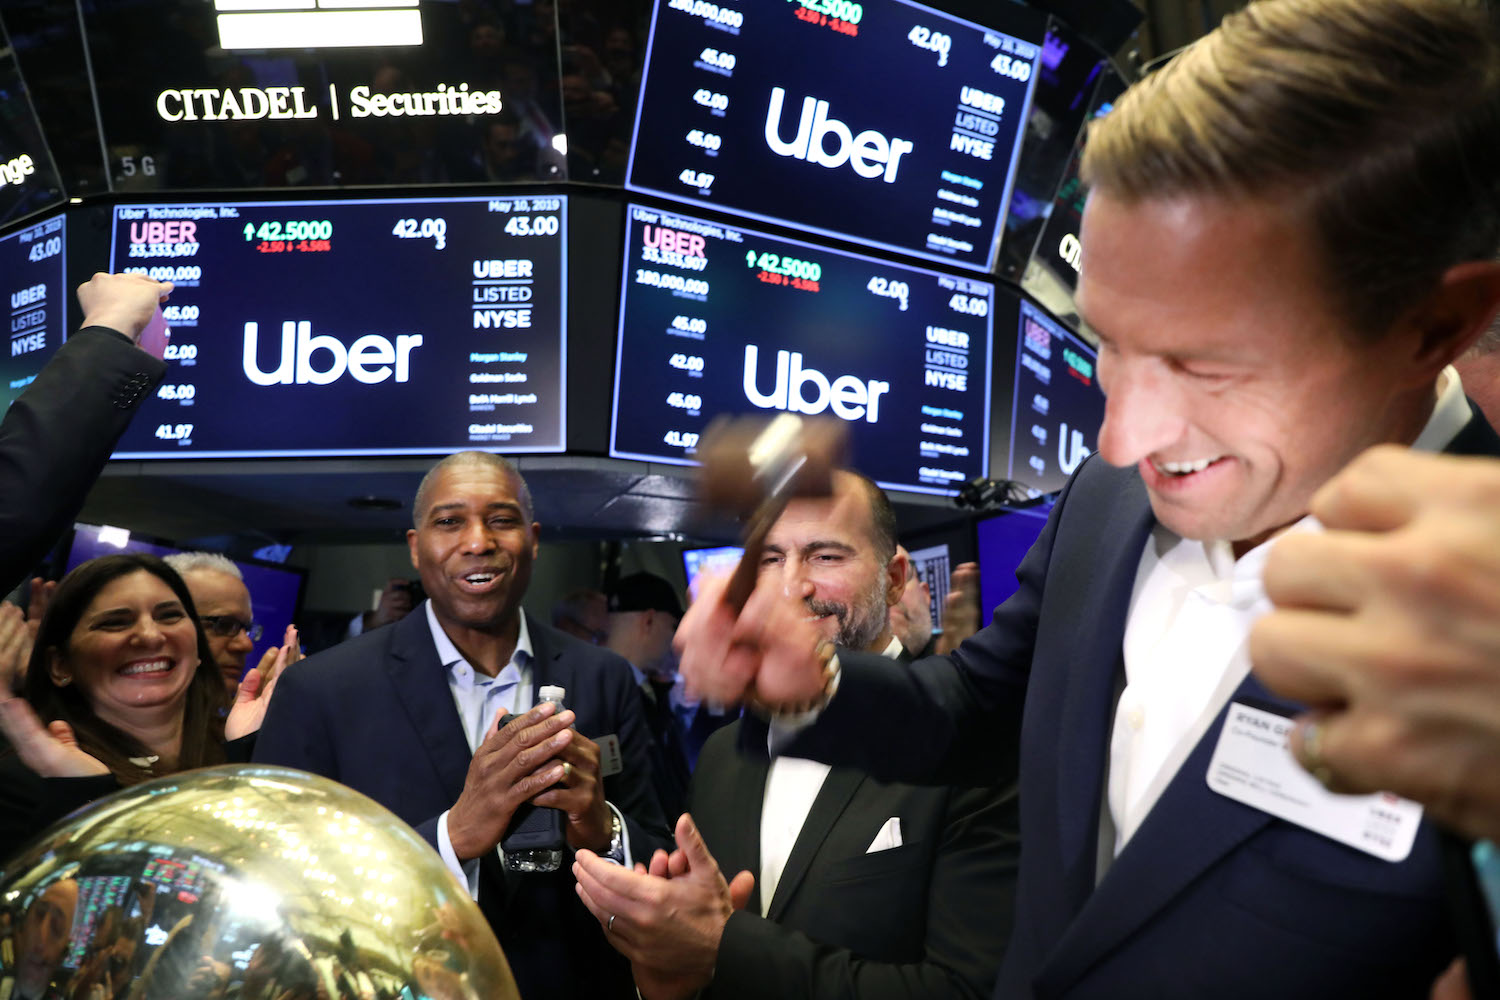 Uber IPO makes Jeff Bezos richer by $400m, but guess who makes a bigger fortune